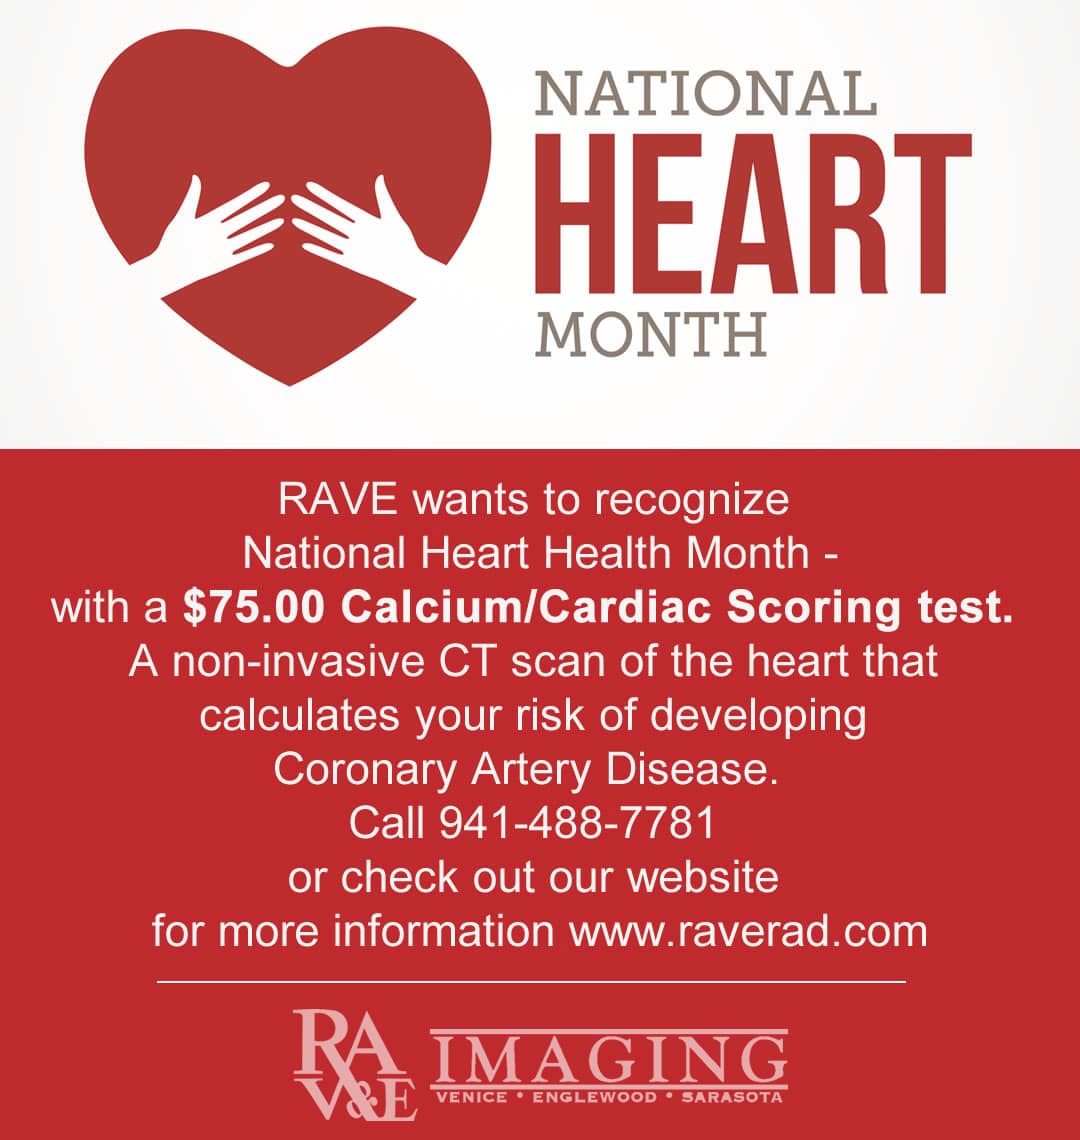 National Heart Month February 2020